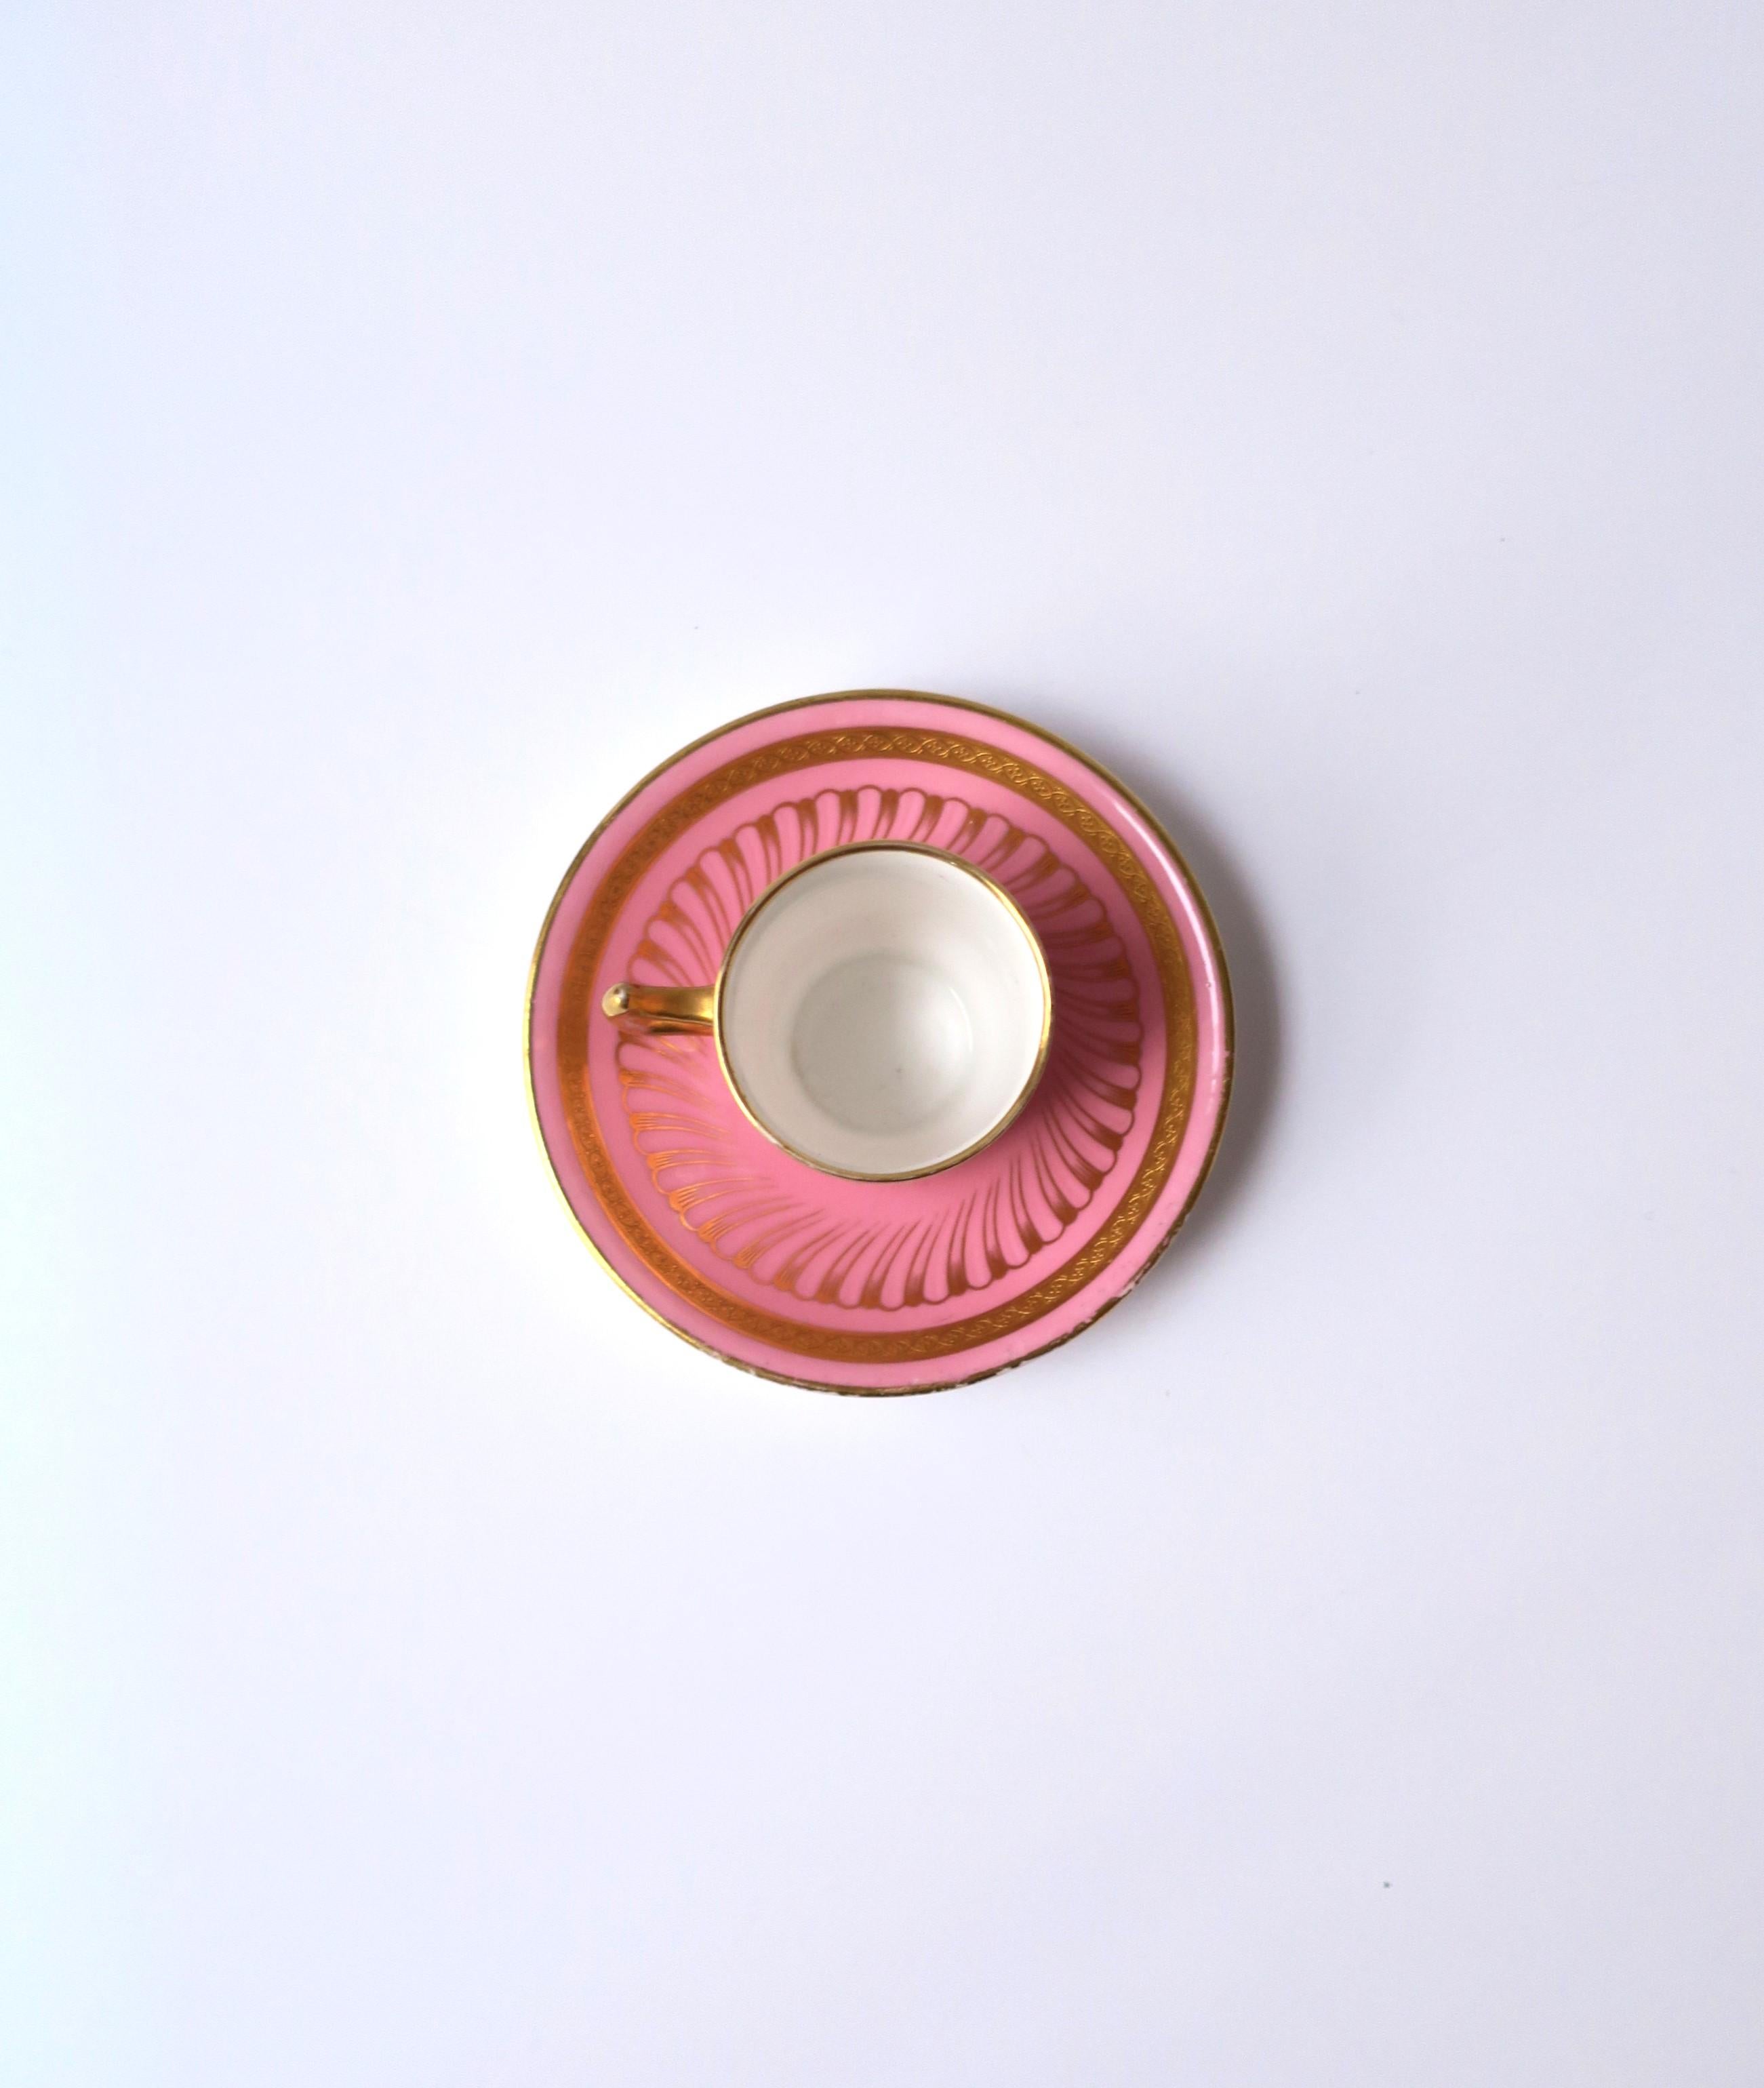 English Minton Pink & Gold Porcelain Coffee Espresso Cup & Saucer, 19th century For Sale 1